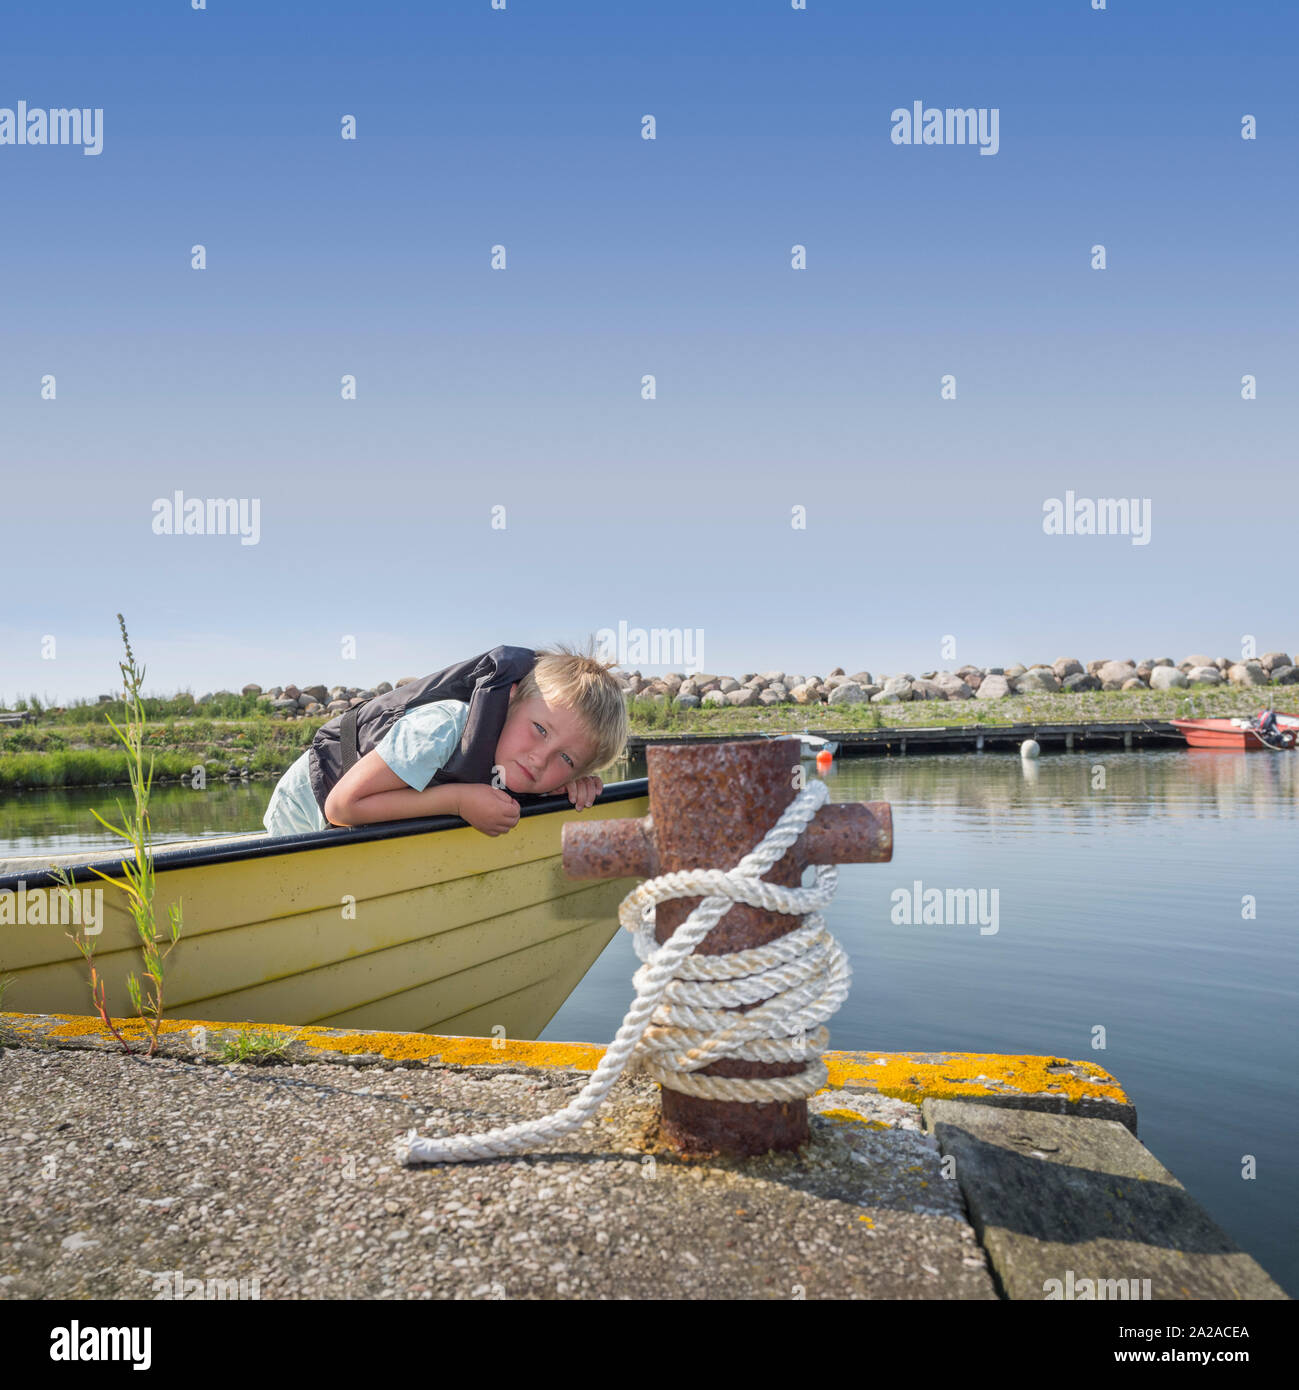 Young boy with life jacket in a moored boat at a jetty Stock Photo